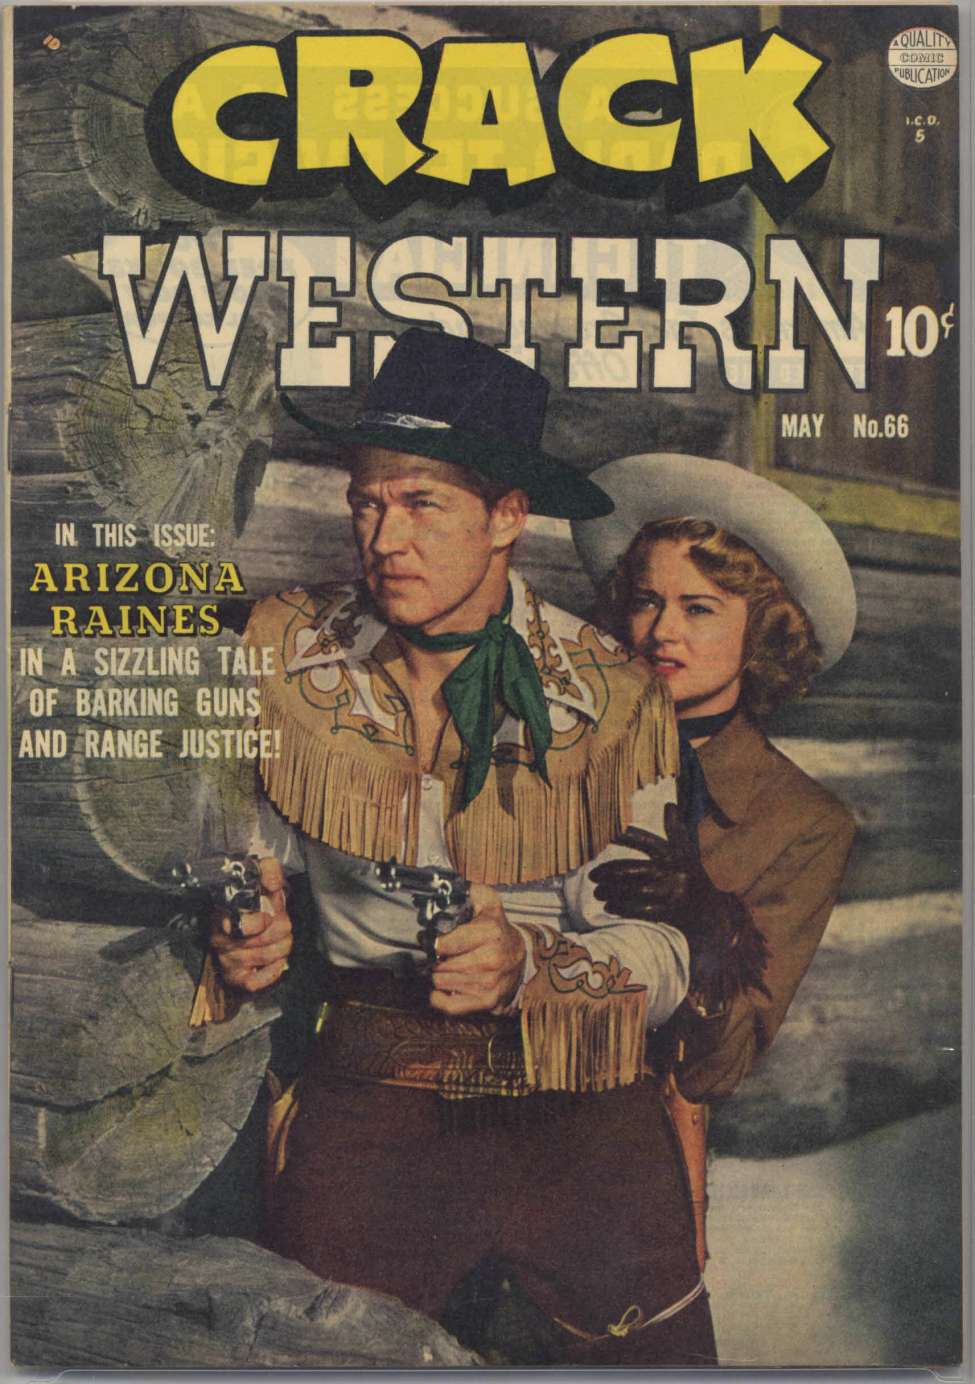 Book Cover For Crack Western 66 - Version 1